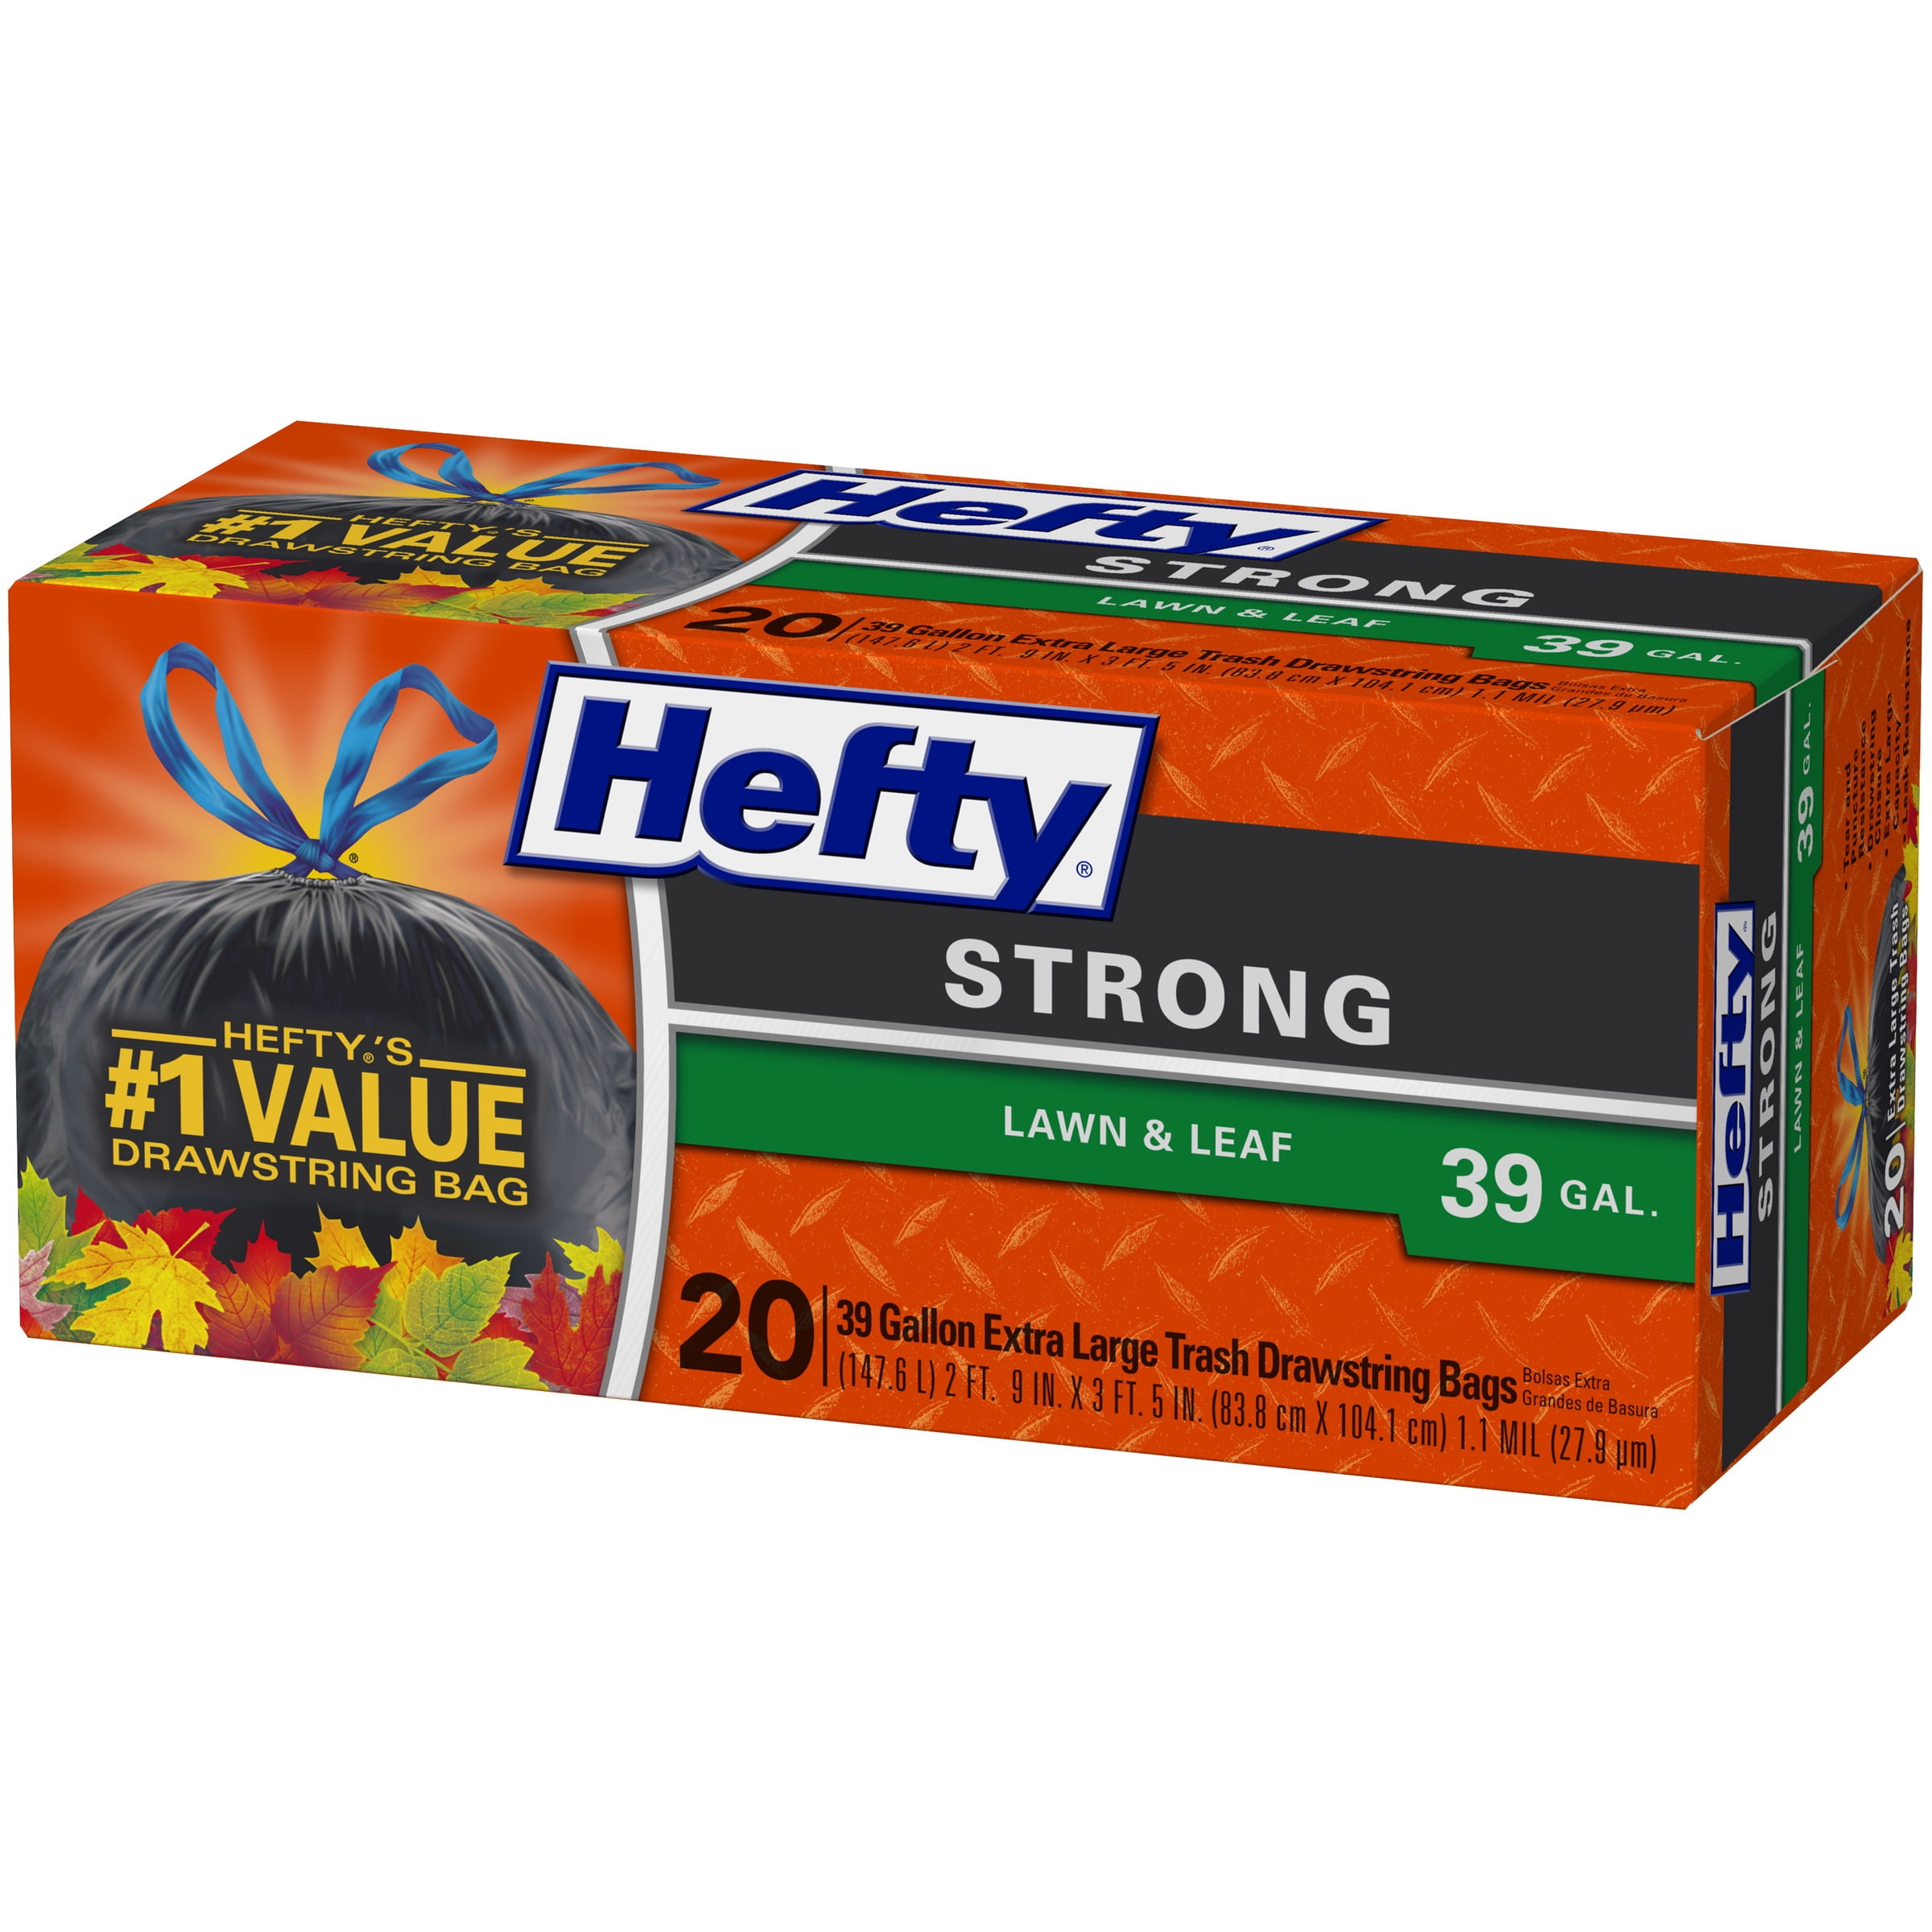 Pack of 2, 76 Total 39 Gallon 38 Count Hefty Strong Lawn AND Leaf Trash Bags 